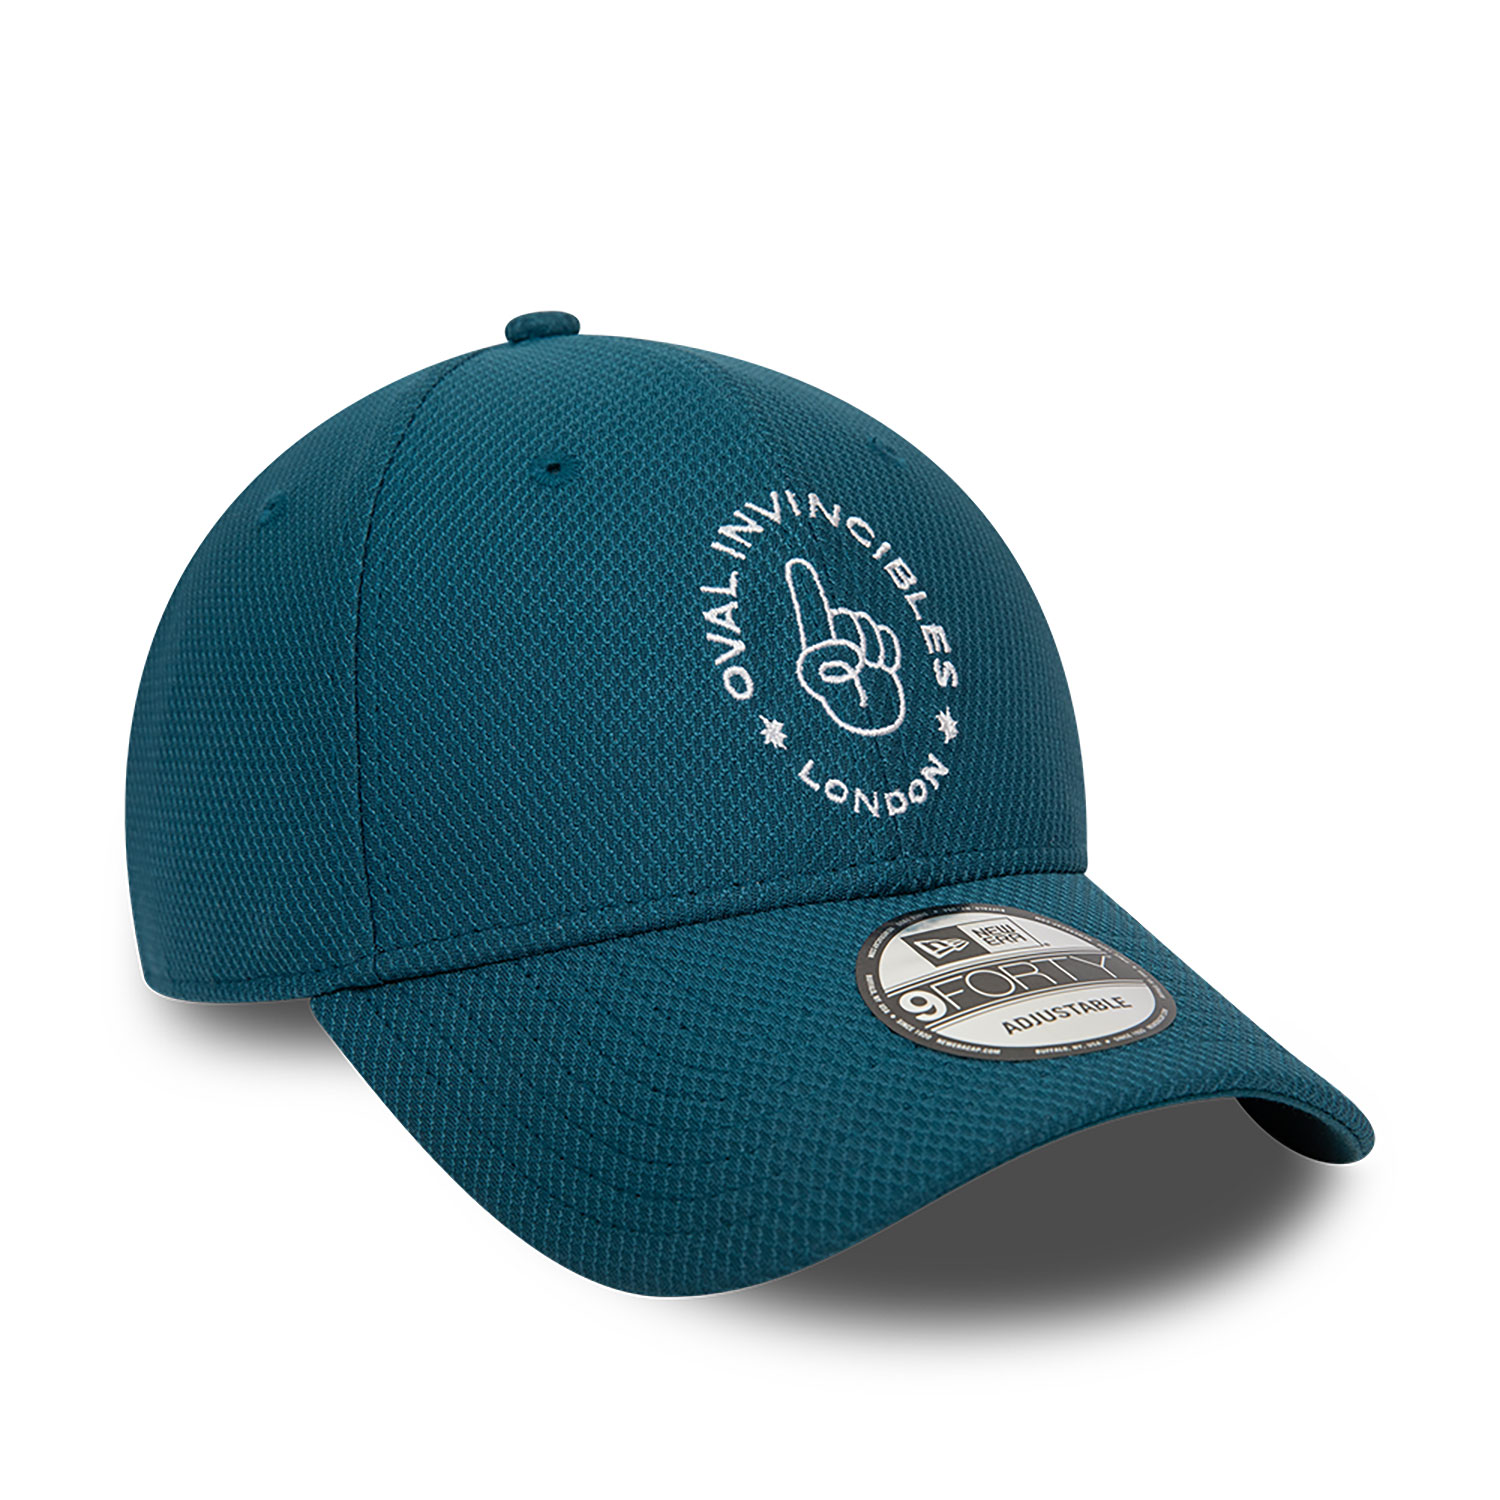 Oval Invincibles The Hundred Blue 9FORTY Adjustable Cap